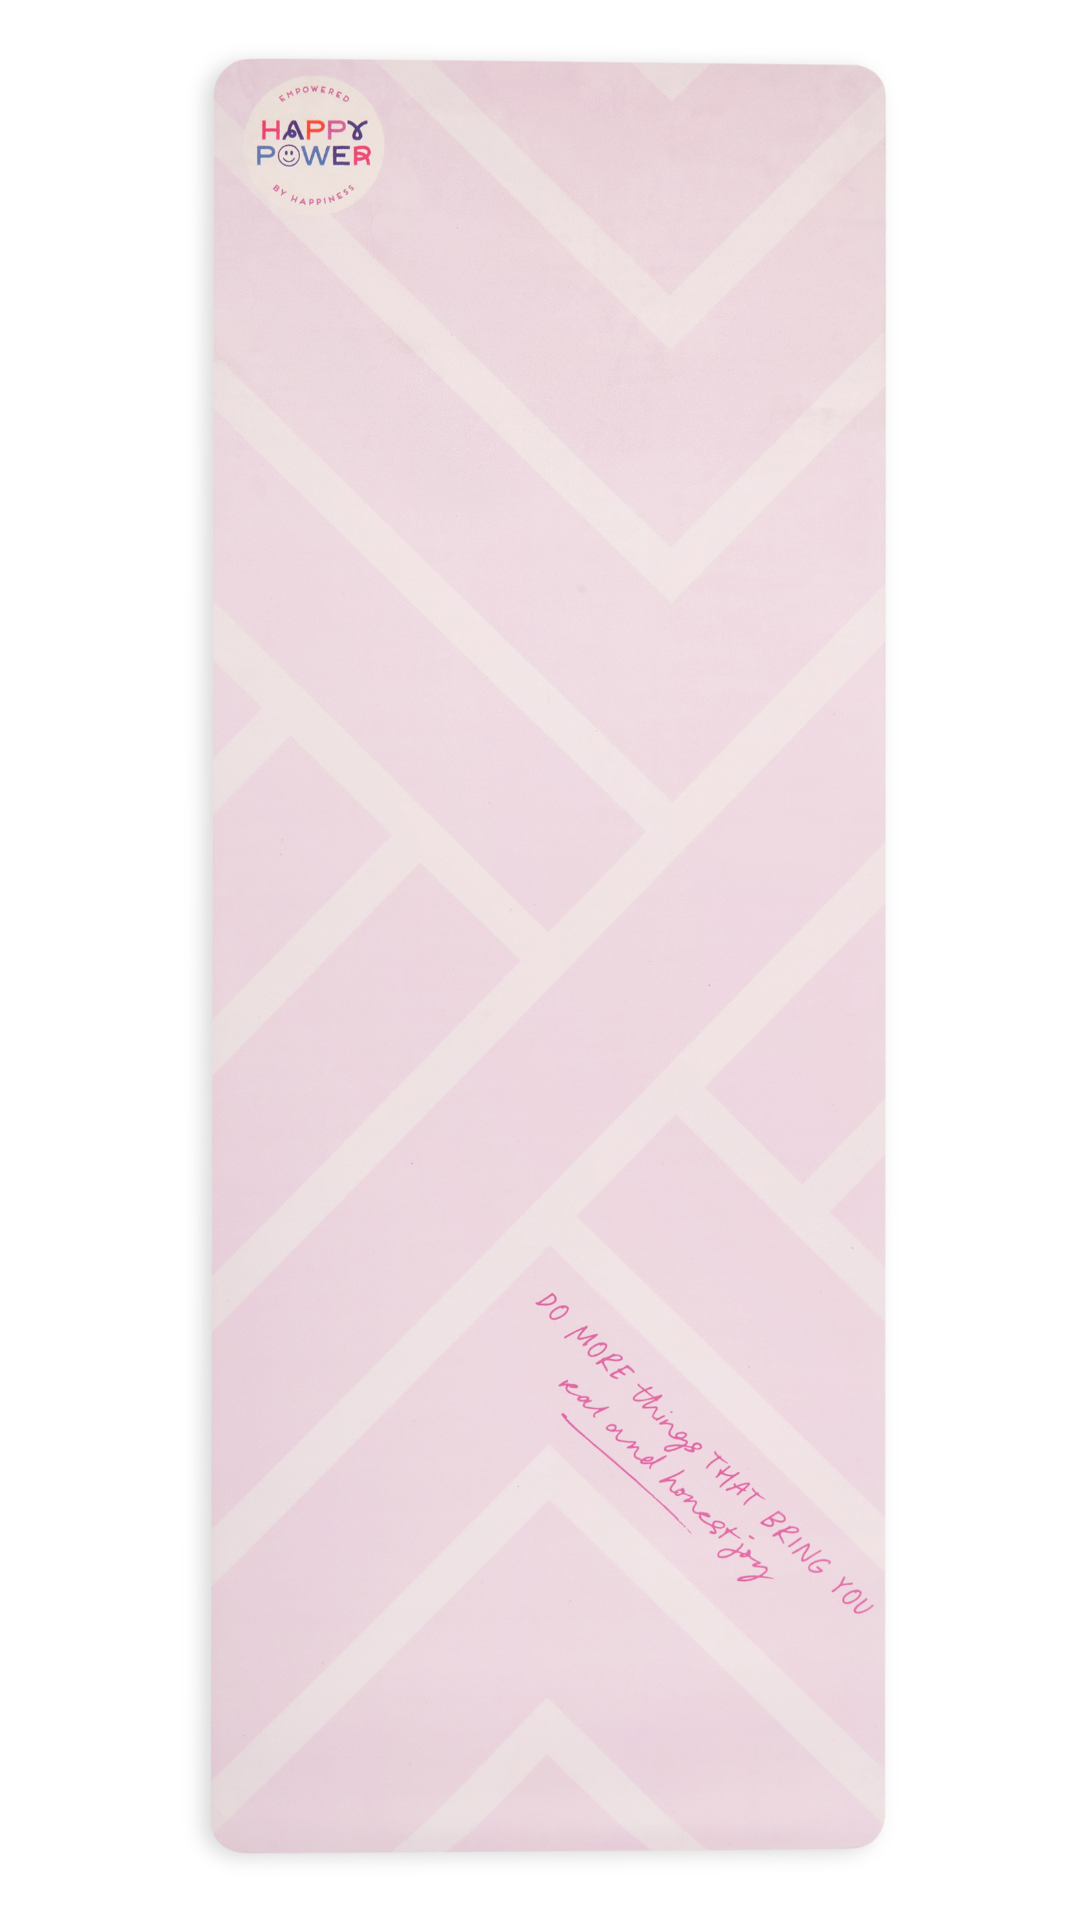 Eco friendly yoga and exercise mat featuring Pale pink design with alternating parallel lighter pink lines. Do more things that bring you real and honest joy'